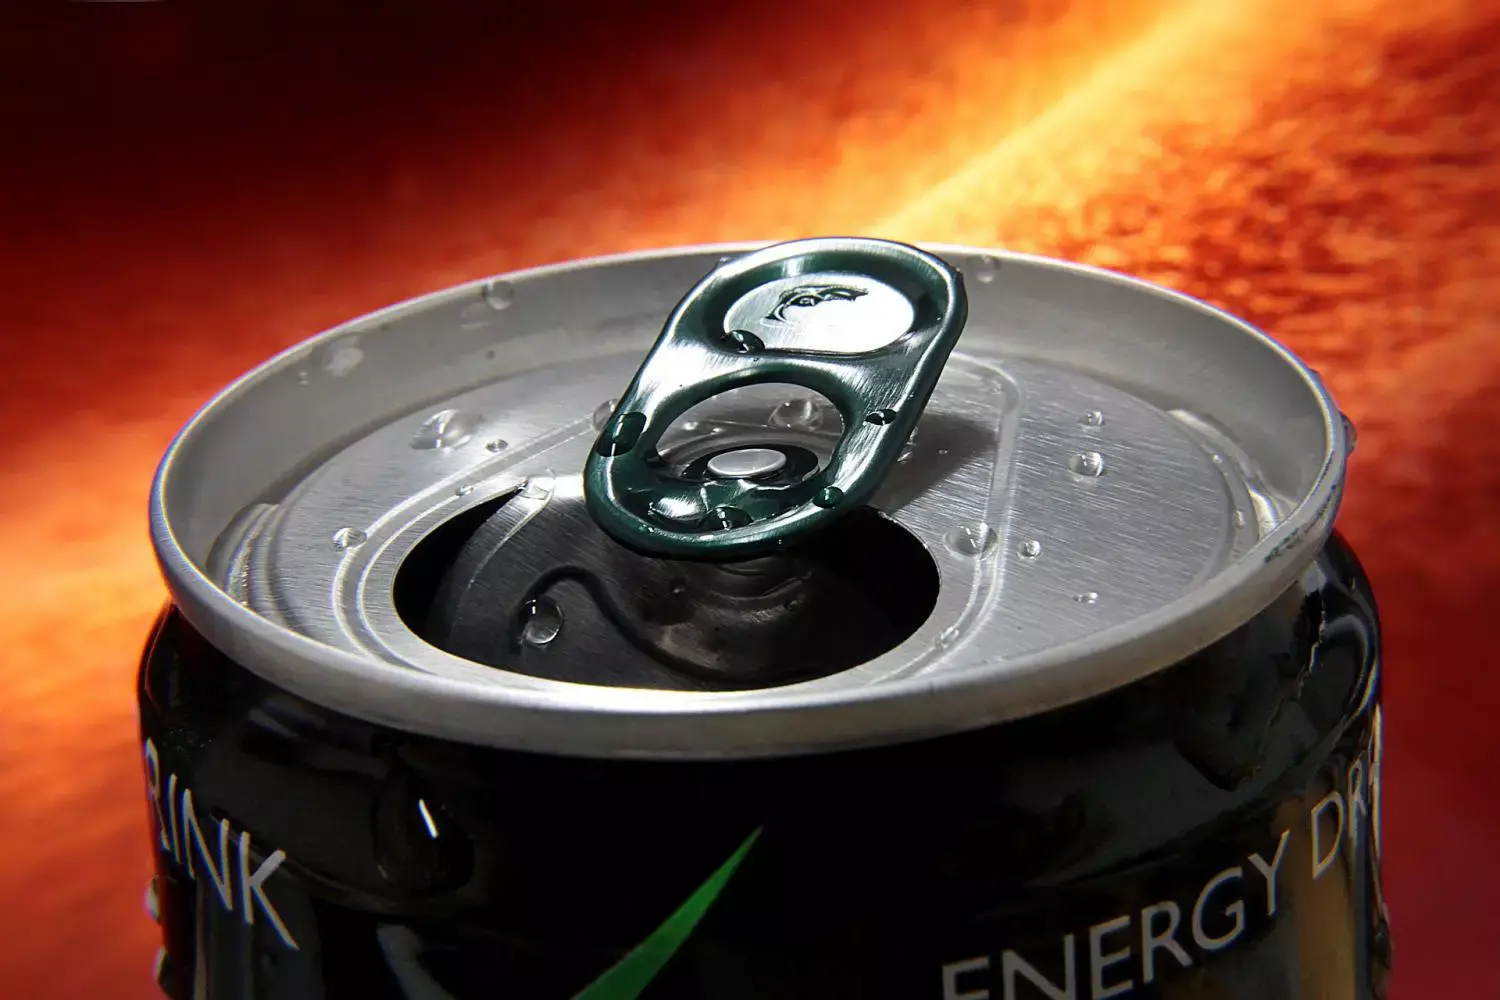 Energy drinks tied to risk of life-threatening cardiac arrhythmias among genetic heart diseases patients: Study